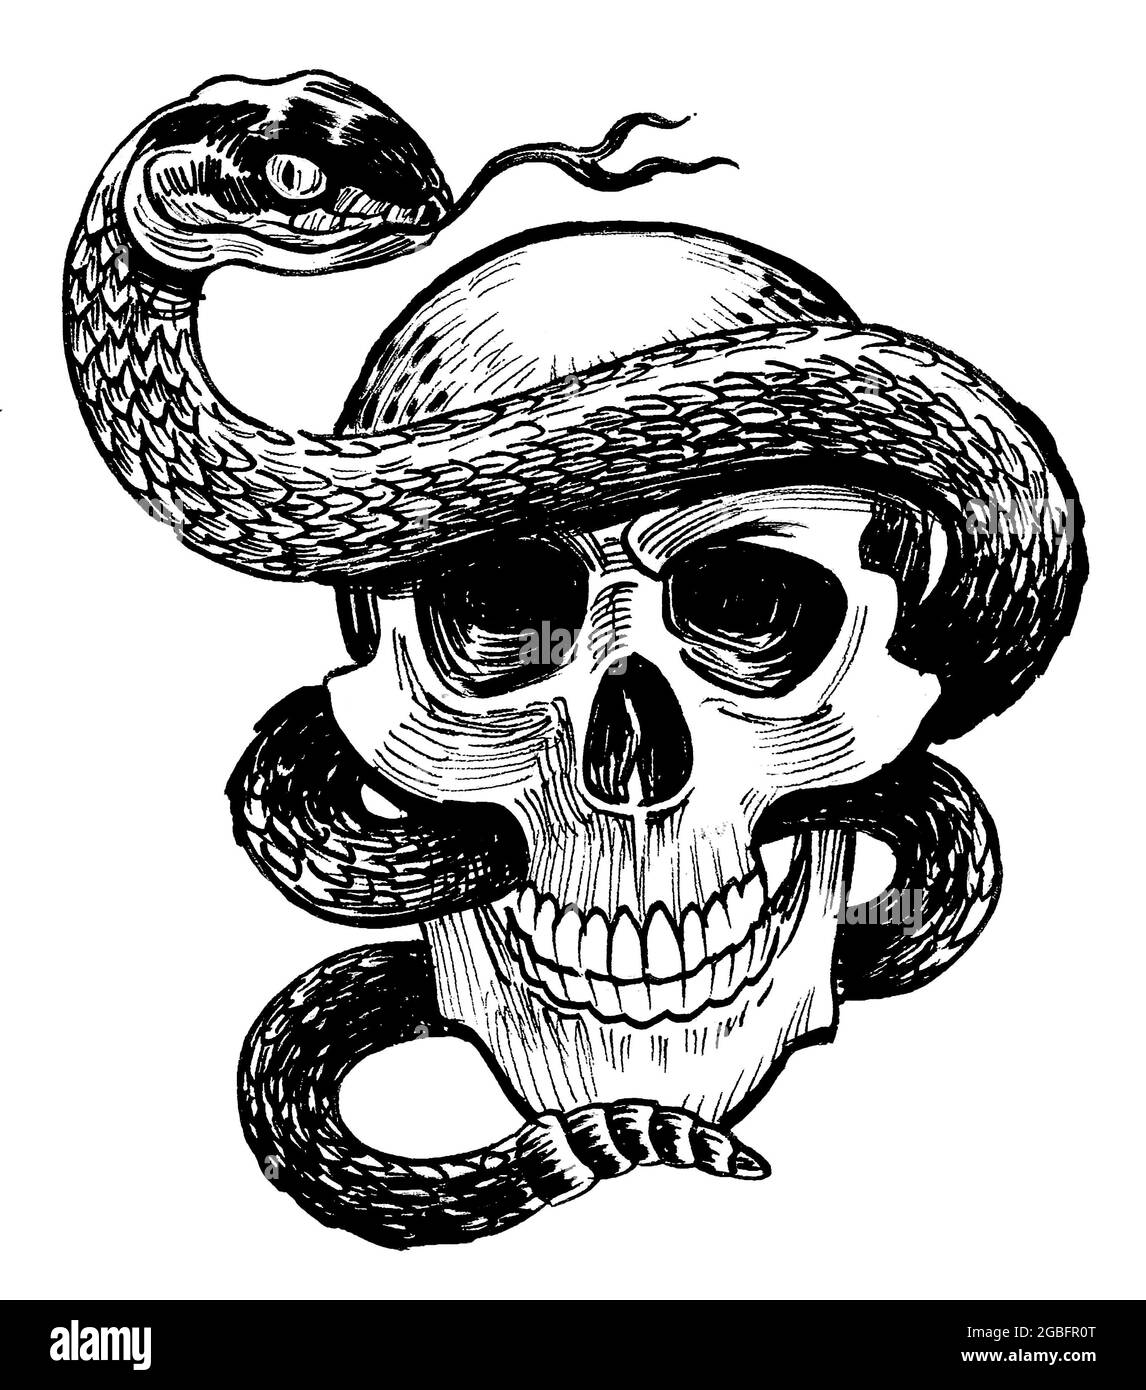 Human skull and poisonous snake. Ink black and white drawing Stock Photo